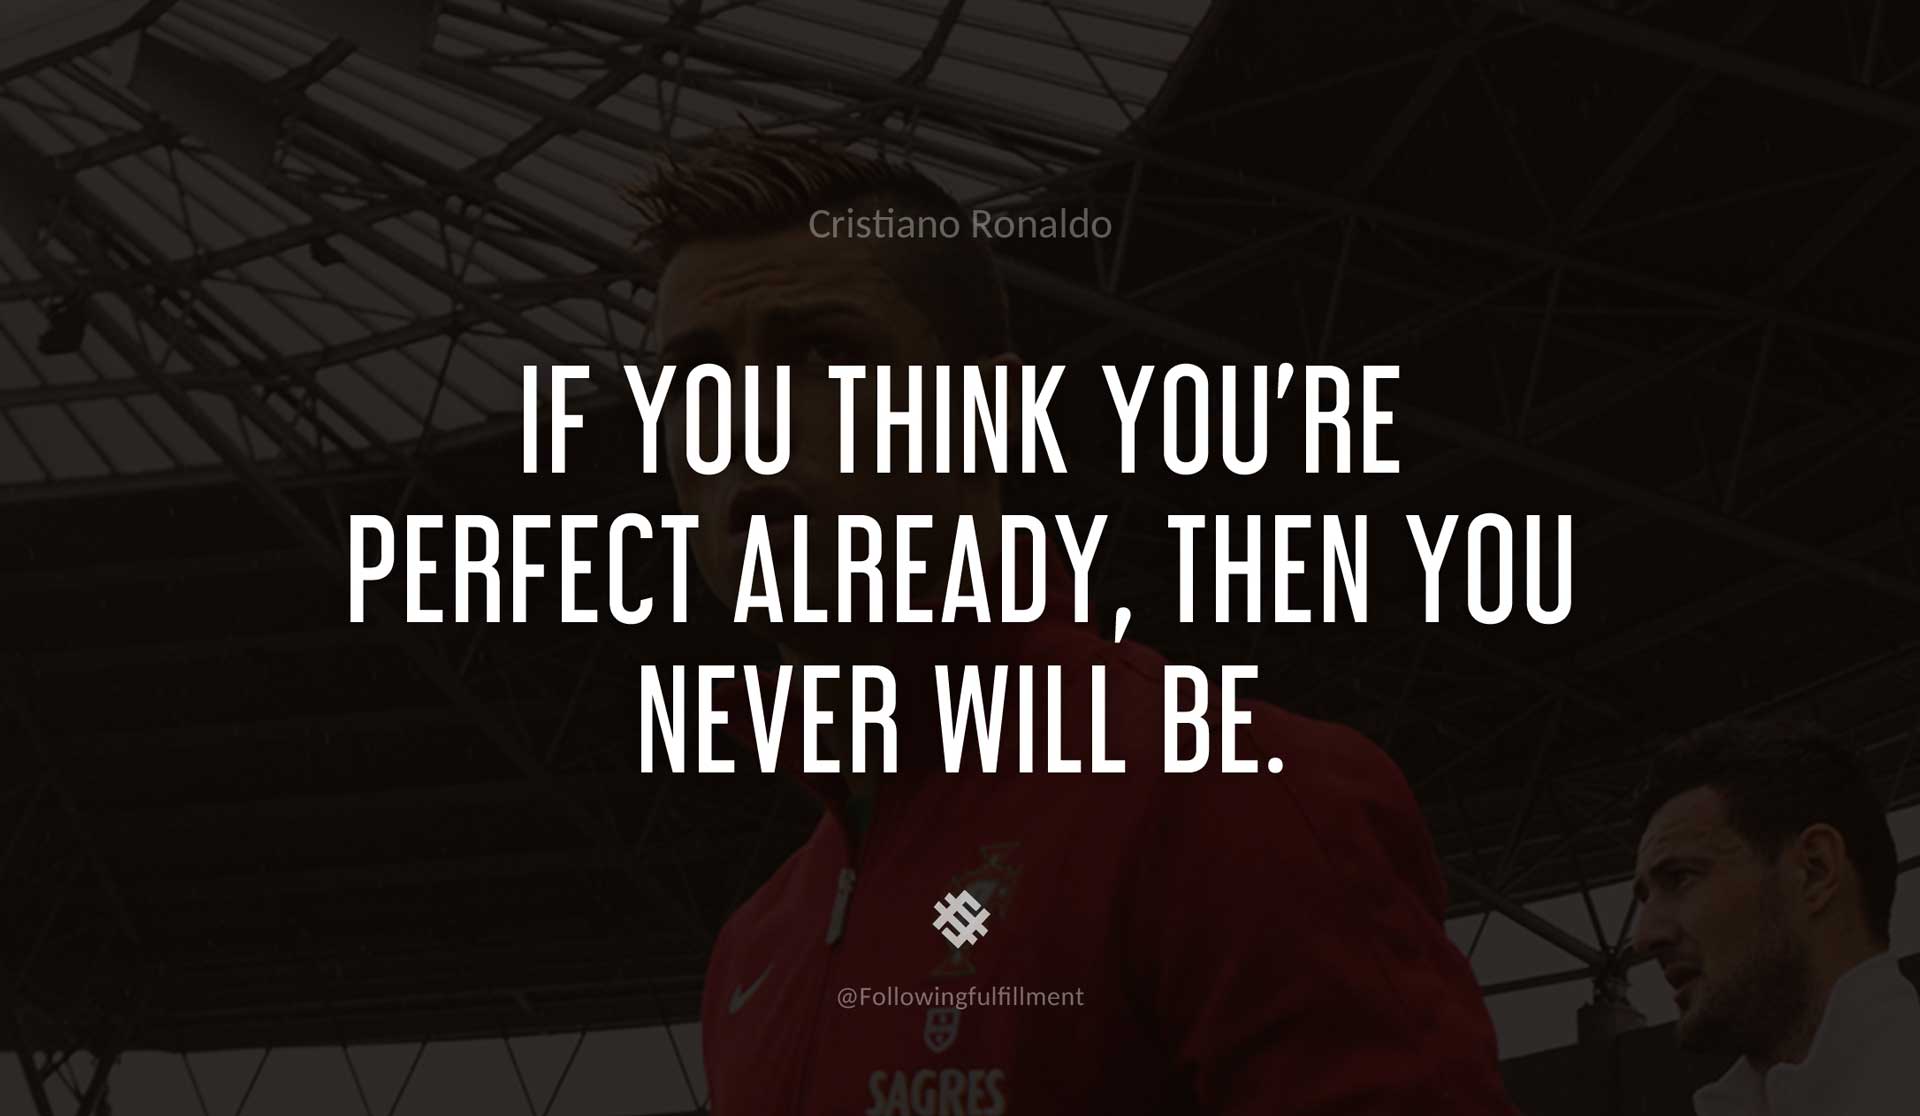 If-you-think-you're-perfect-already,-then-you-never-will-be.-CRISTIANO-RONALDO-Quote.jpg